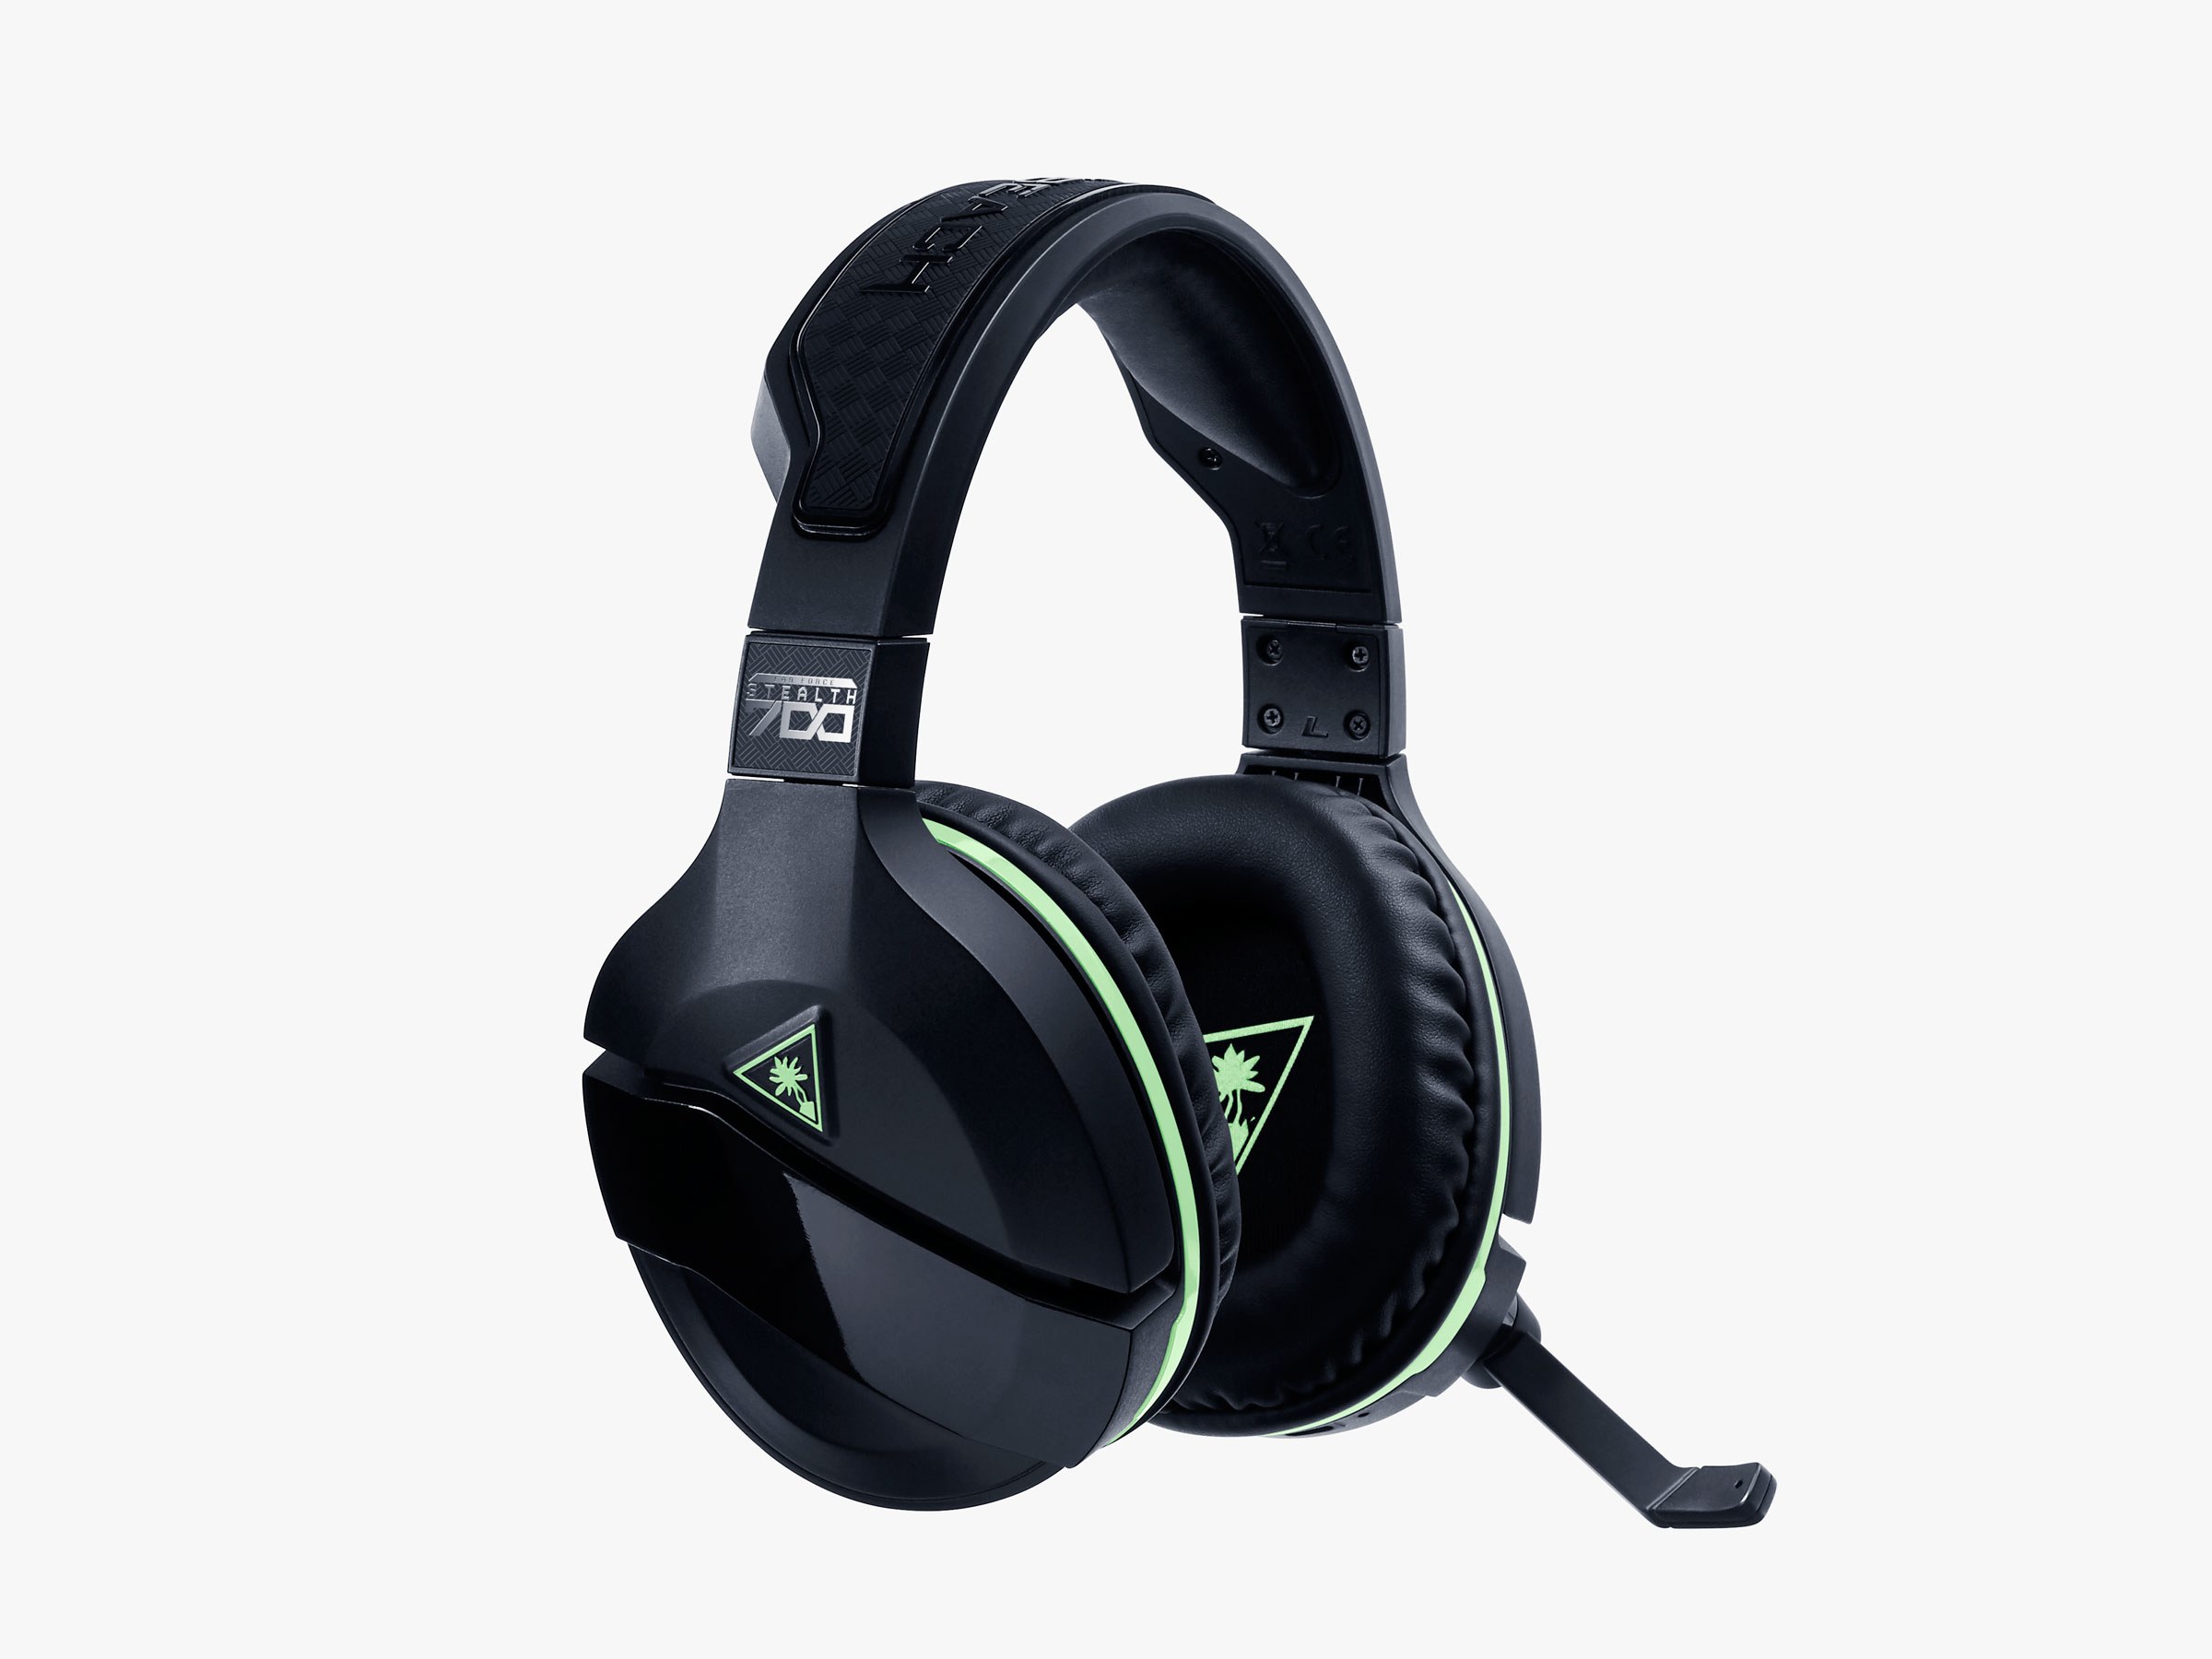 Review: Turtle Beach Ear Force Stealth 700 (PS4/Xbox One) | WIRED